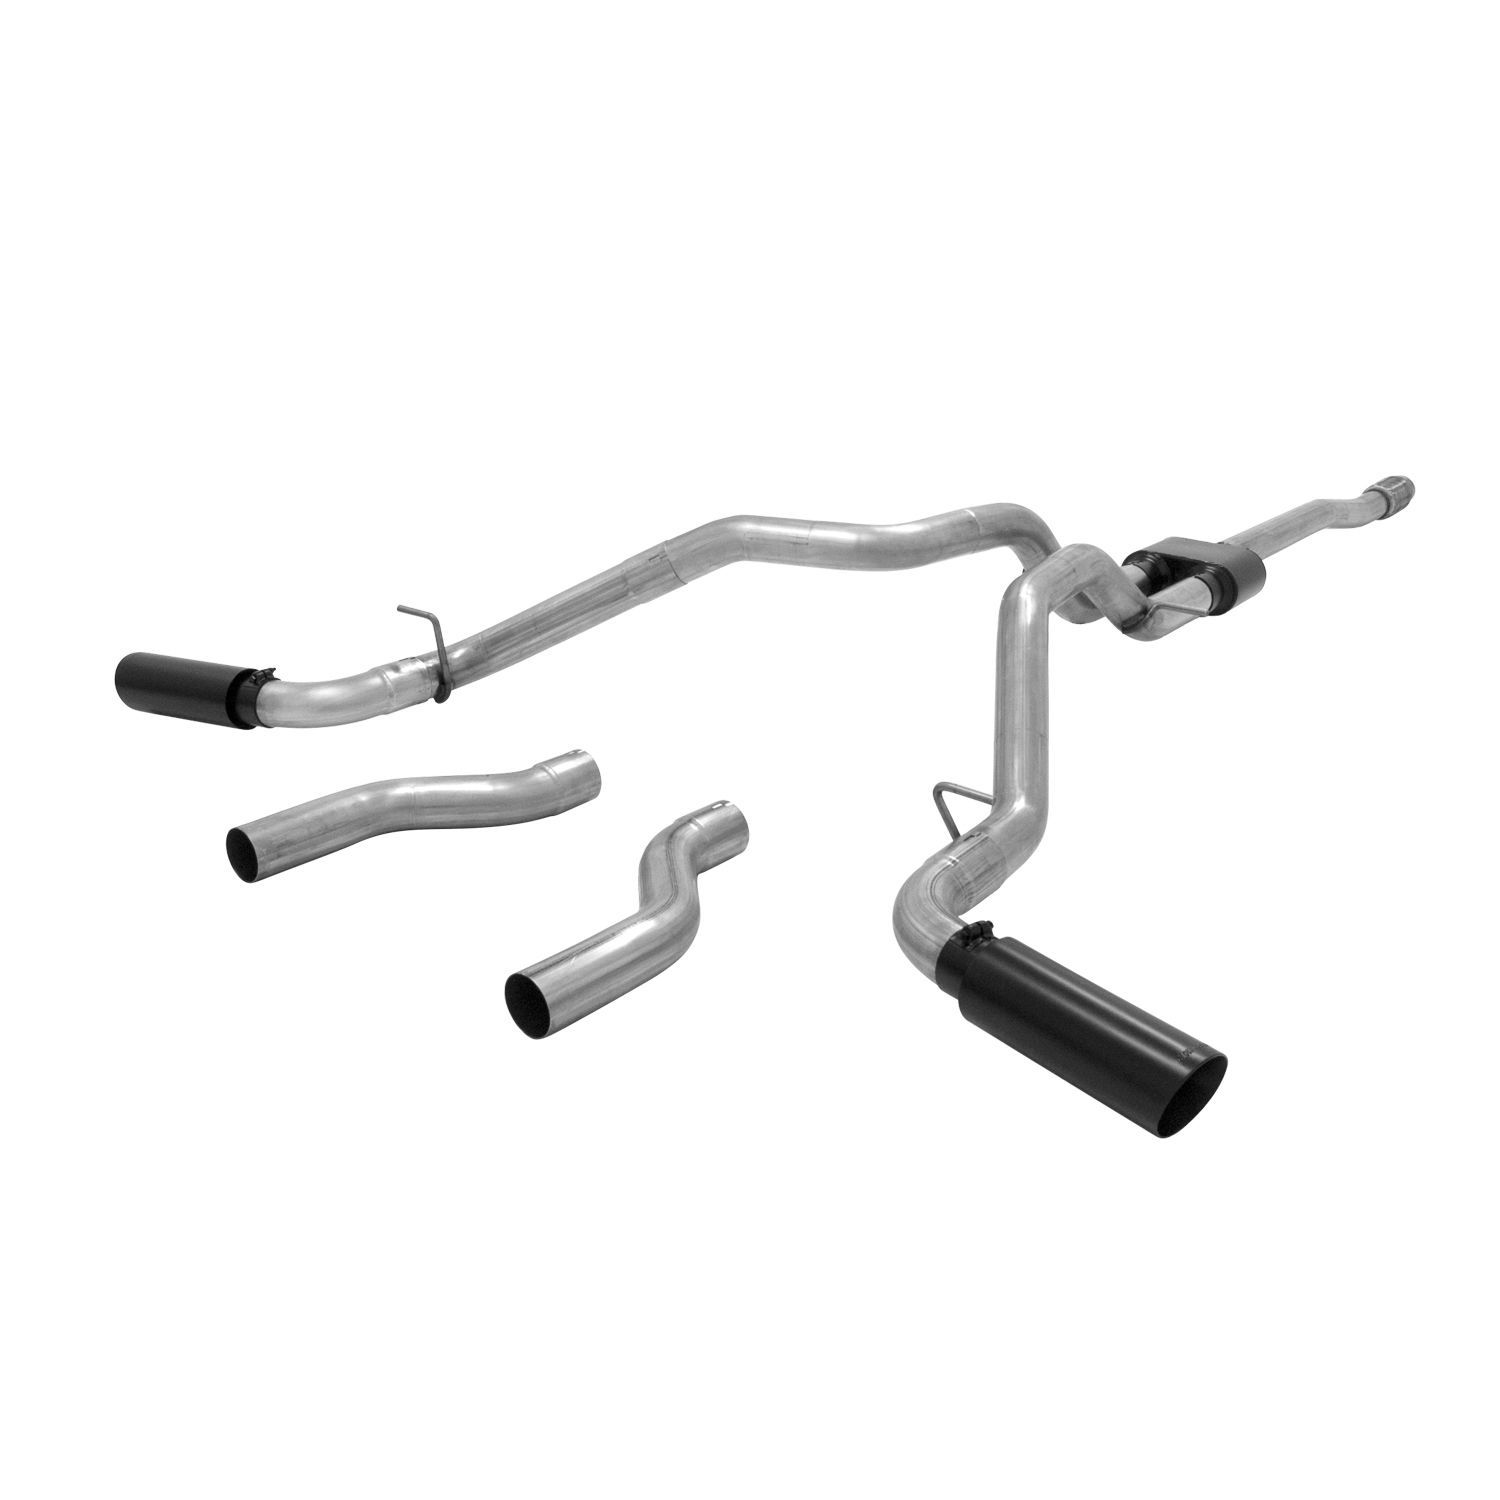 2009-2013 GMC Sierra 1500 5.3L 4DR Crew Cab/EXT Cab Flowmaster Outlaw Cat-Back Exhaust - 817688